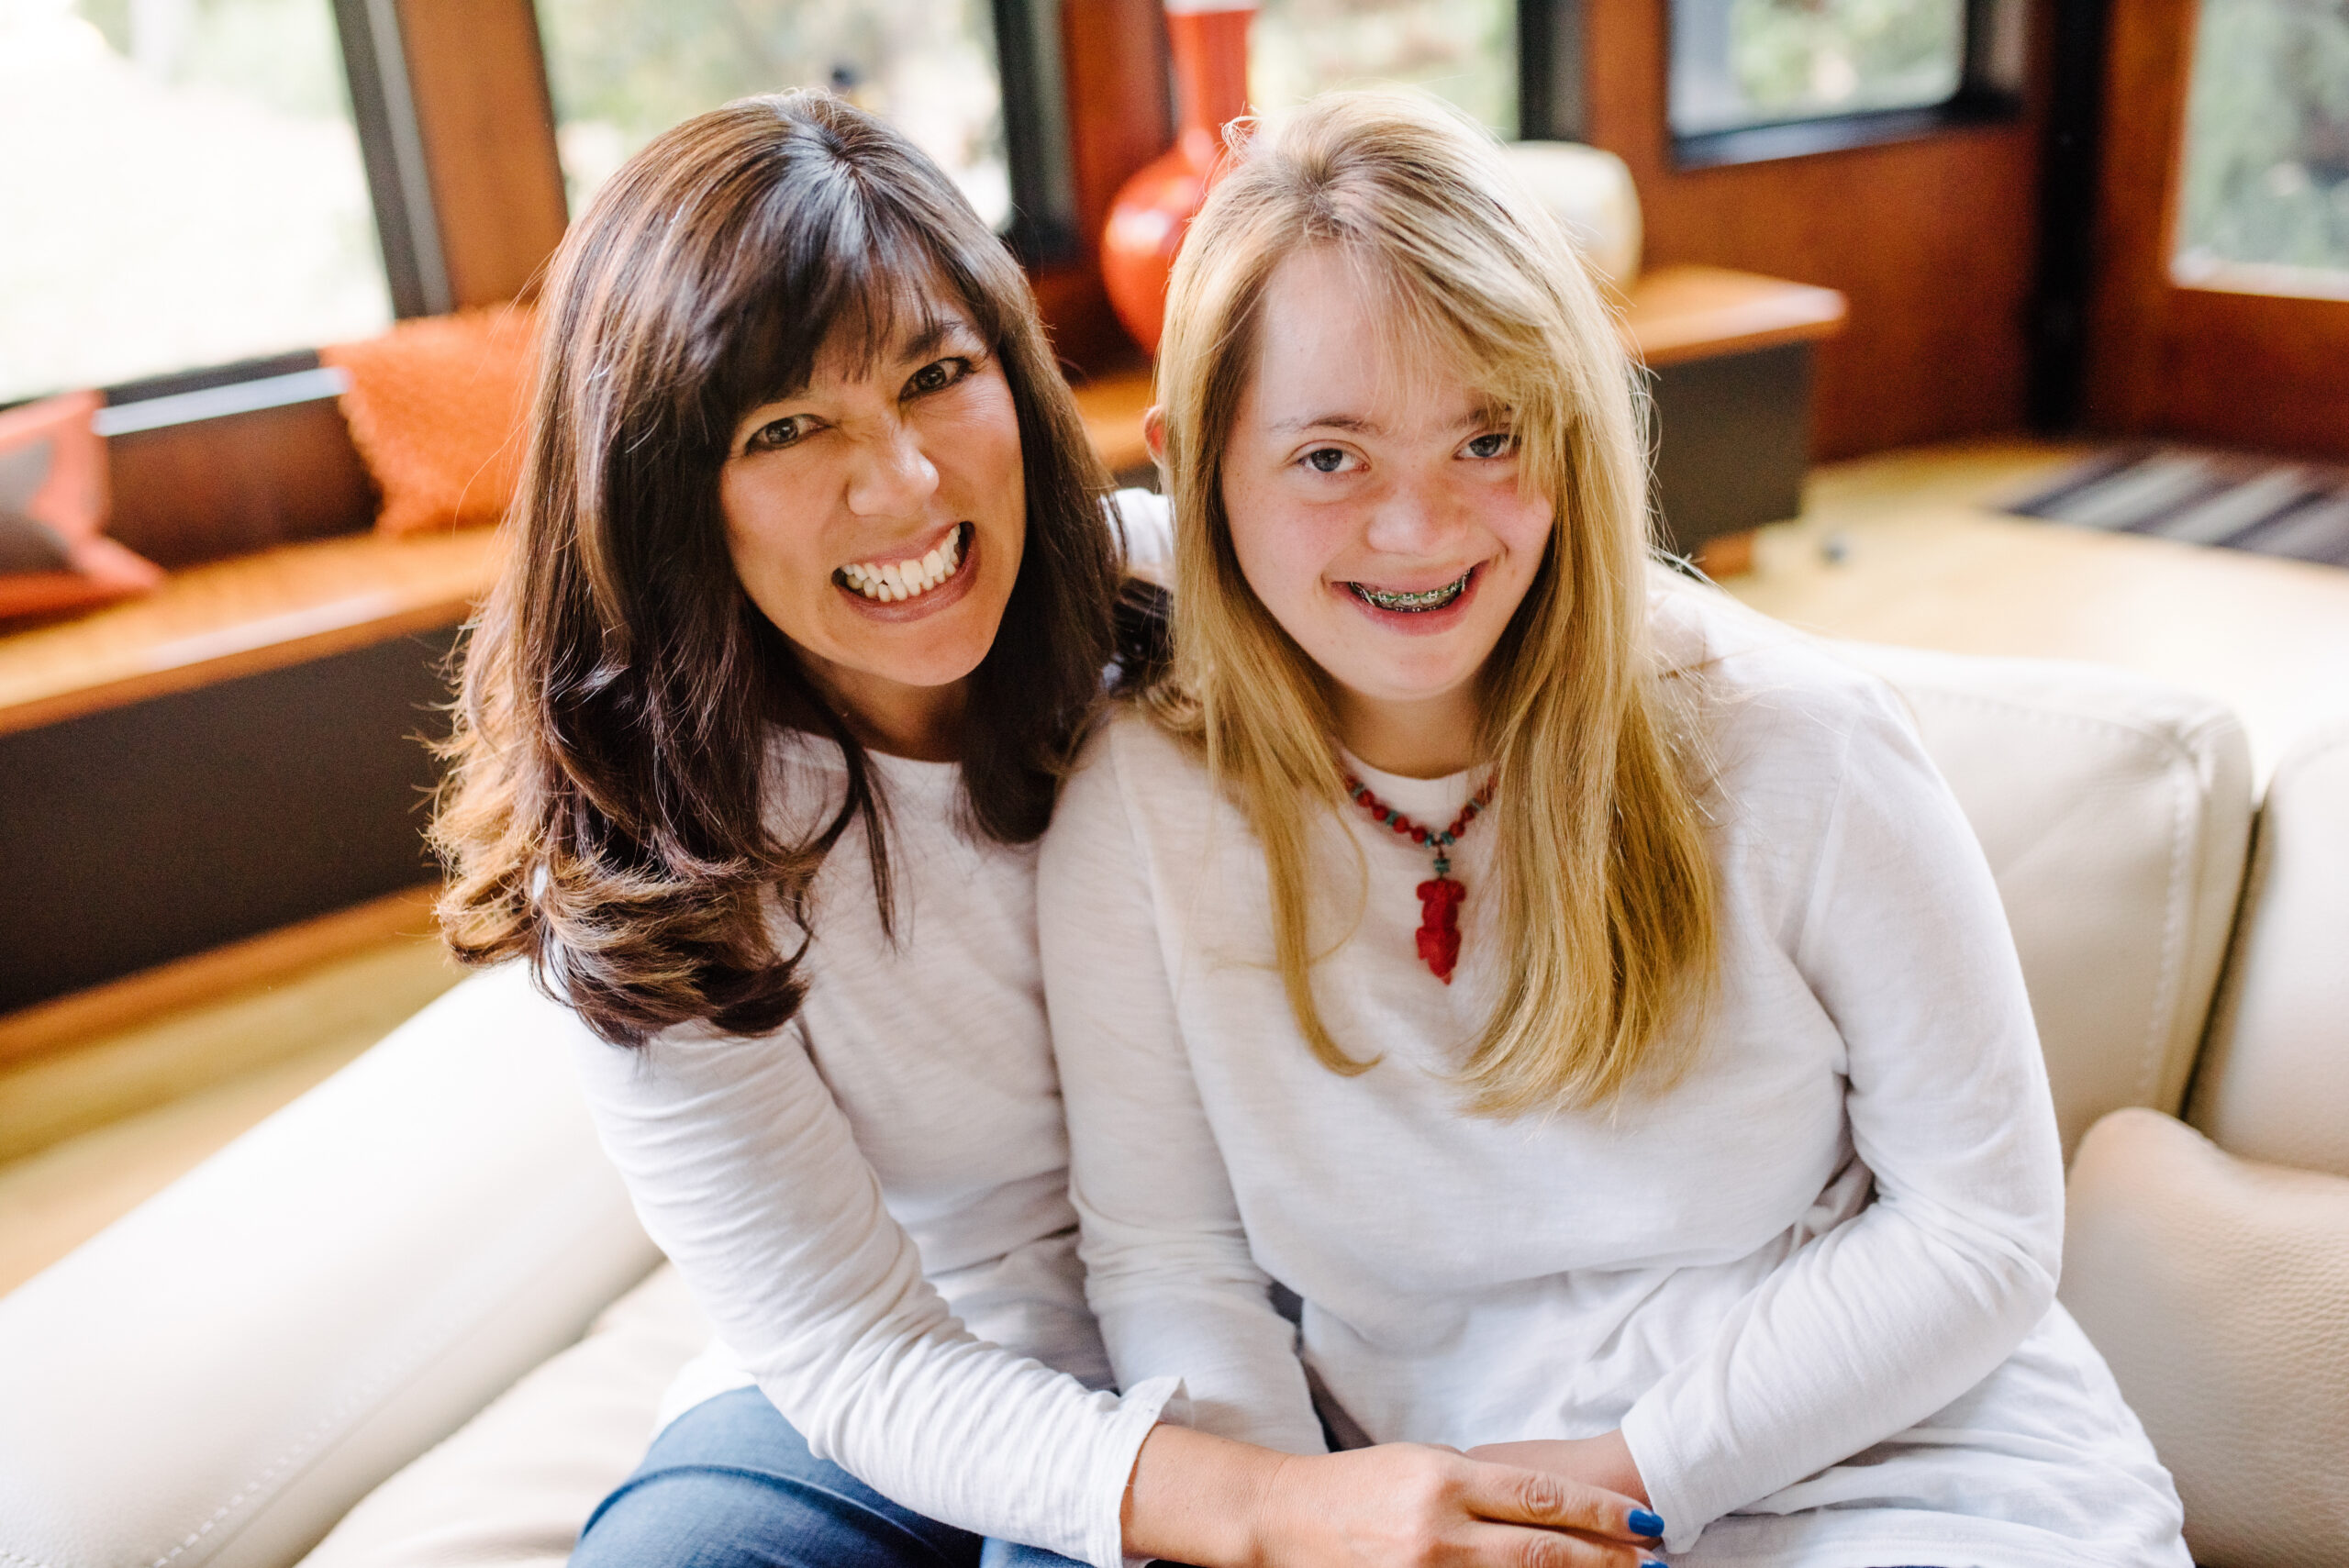 Global Down Syndrome Foundation President & CEO Michelle Sie Whitten to be Inducted into the Denver Business Journal Hall of Fame for Her Transformative Research and Medical Work for Children and Adults with Down Syndrome